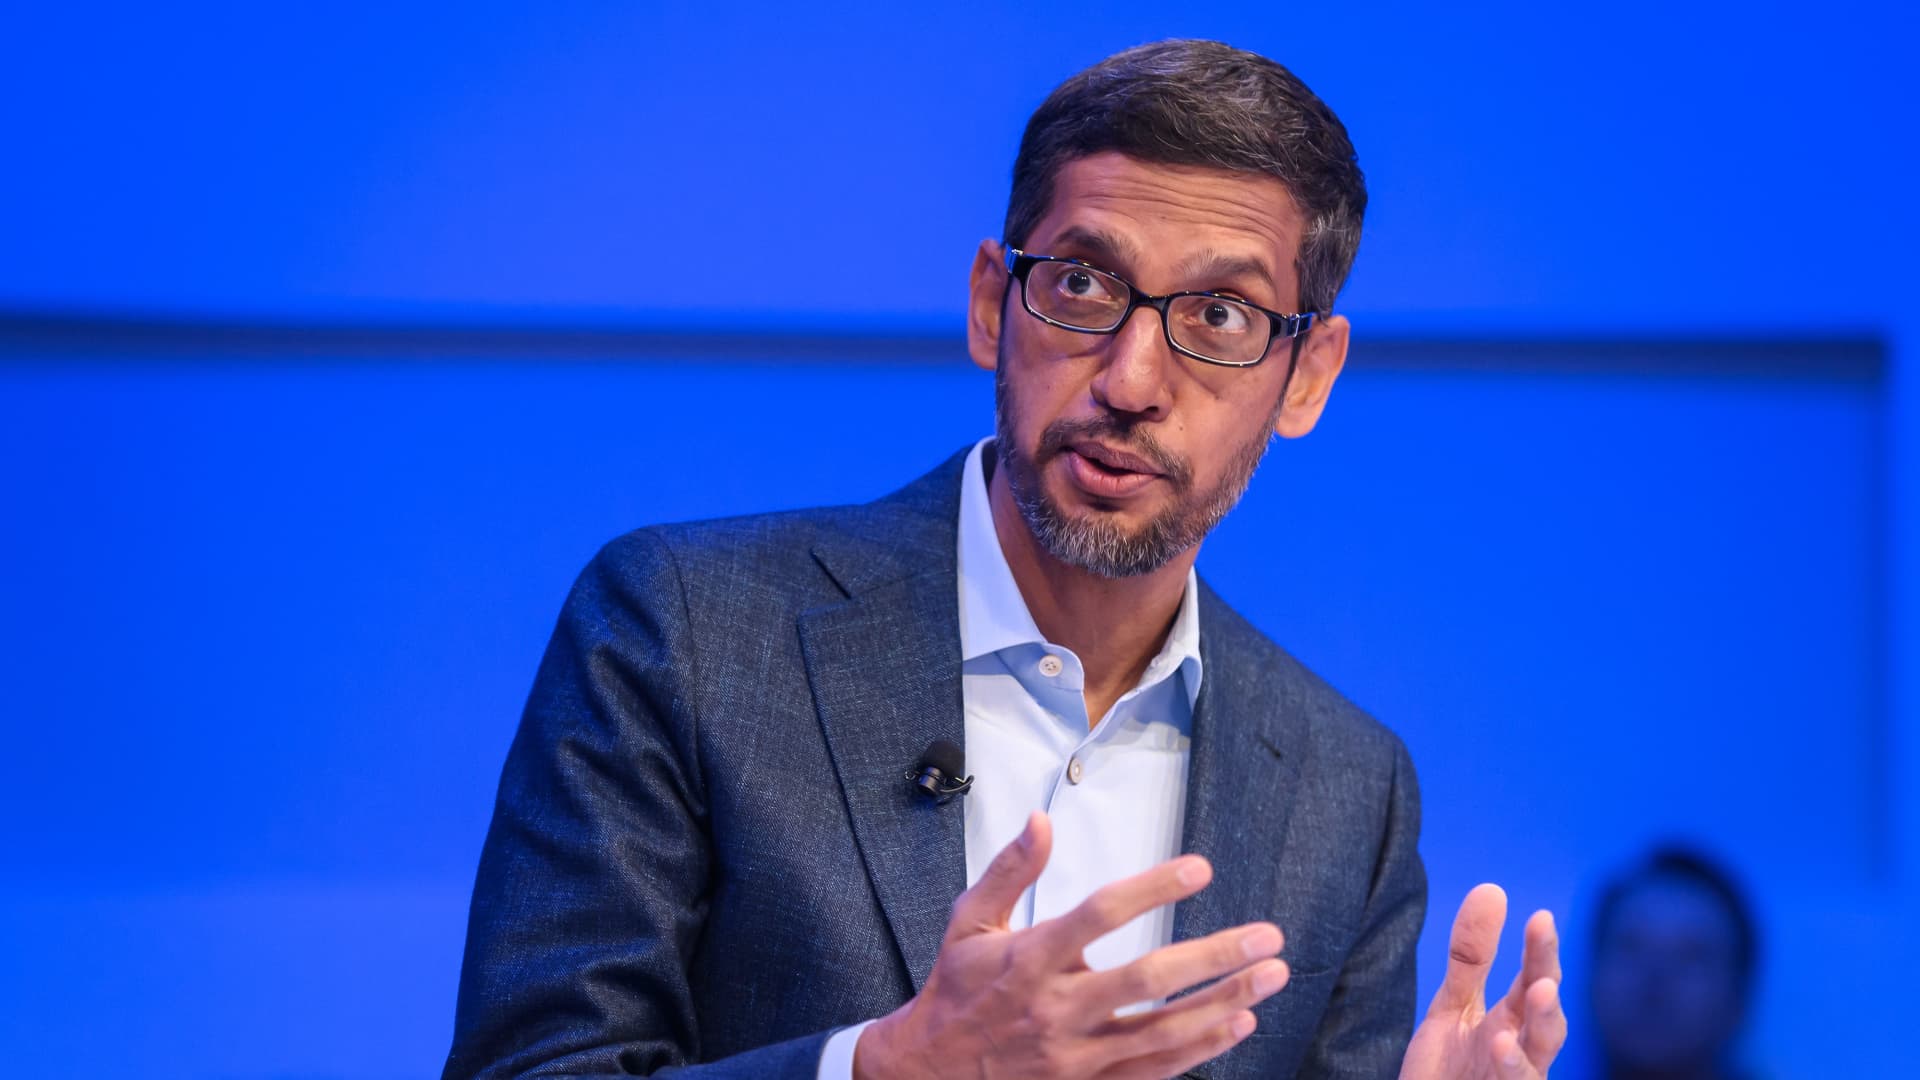 Google CEO Pichai tells employees not to ‘equate fun with money’ in heated all-hands meeting